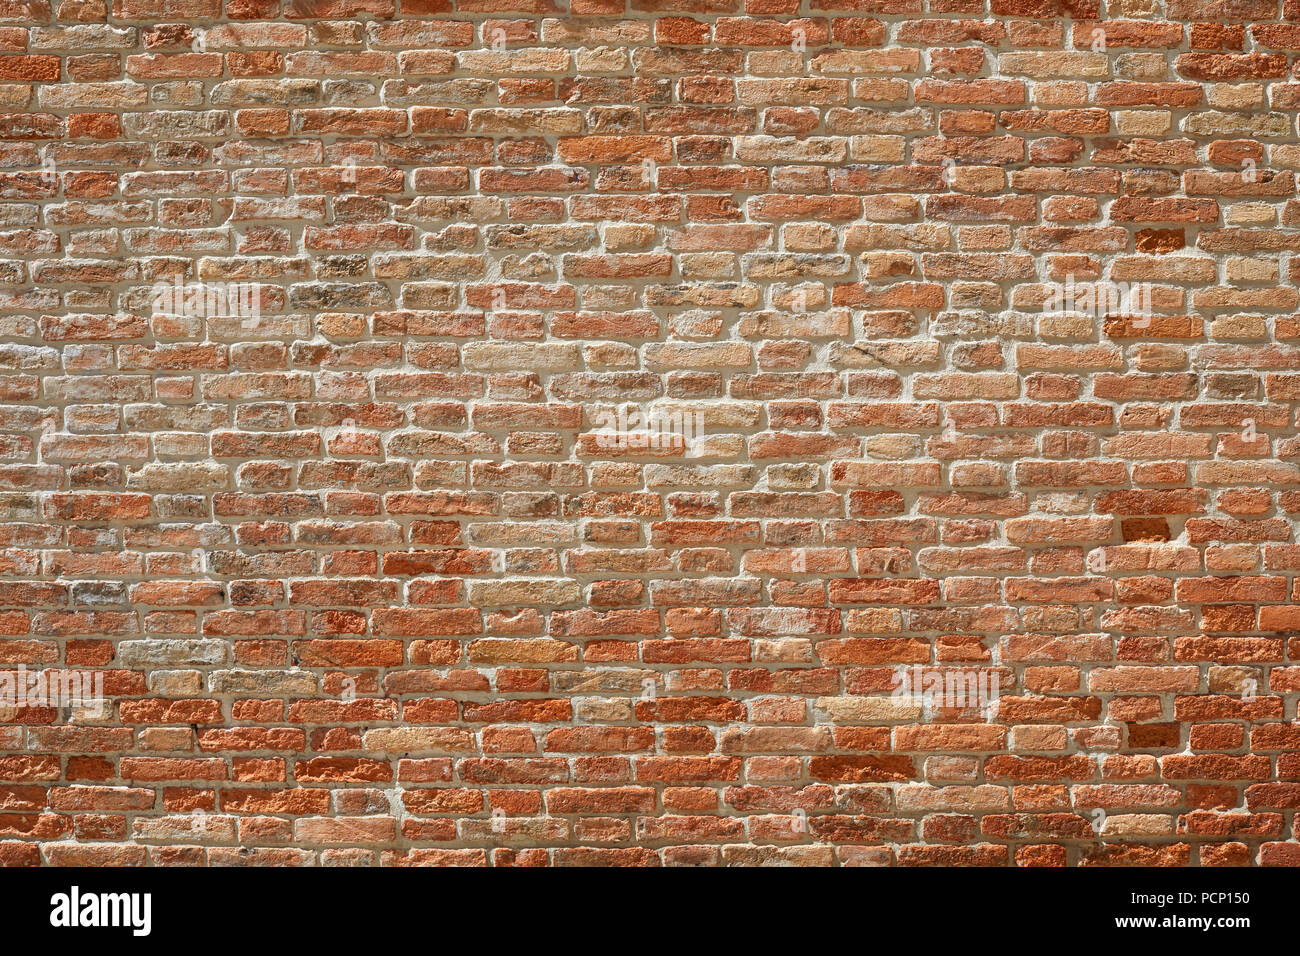 Old red brick wall texture background in sunlight with shadows Stock Photo